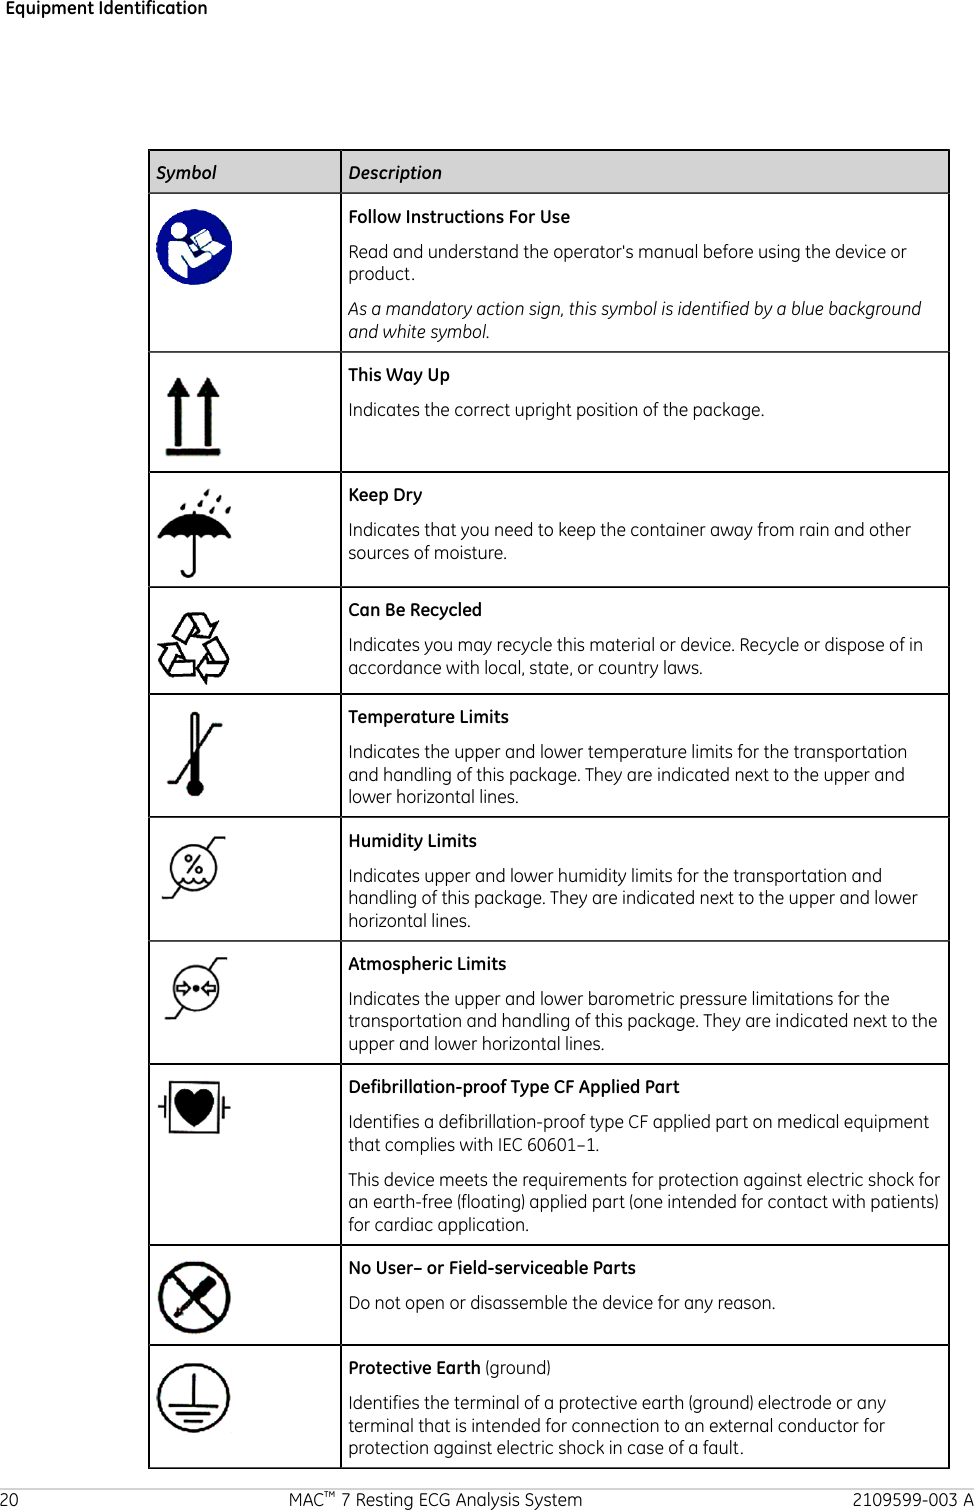 Equipment IdentificationSymbol DescriptionFollow Instructions For UseRead and understand the operator&apos;s manual before using the device orproduct.As a mandatory action sign, this symbol is identified by a blue backgroundand white symbol.This Way UpIndicates the correct upright position of the package.Keep DryIndicates that you need to keep the container away from rain and othersources of moisture.Can Be RecycledIndicates you may recycle this material or device. Recycle or dispose of inaccordance with local, state, or country laws.Temperature LimitsIndicates the upper and lower temperature limits for the transportationand handling of this package. They are indicated next to the upper andlower horizontal lines.Humidity LimitsIndicates upper and lower humidity limits for the transportation andhandling of this package. They are indicated next to the upper and lowerhorizontal lines.Atmospheric LimitsIndicates the upper and lower barometric pressure limitations for thetransportation and handling of this package. They are indicated next to theupper and lower horizontal lines.Defibrillation-proof Type CF Applied PartIdentifies a defibrillation-proof type CF applied part on medical equipmentthat complies with IEC 60601–1.This device meets the requirements for protection against electric shock foran earth-free (floating) applied part (one intended for contact with patients)for cardiac application.No User– or Field-serviceable PartsDo not open or disassemble the device for any reason.Protective Earth (ground)Identifies the terminal of a protective earth (ground) electrode or anyterminal that is intended for connection to an external conductor forprotection against electric shock in case of a fault.20 MAC™ 7 Resting ECG Analysis System 2109599-003 A